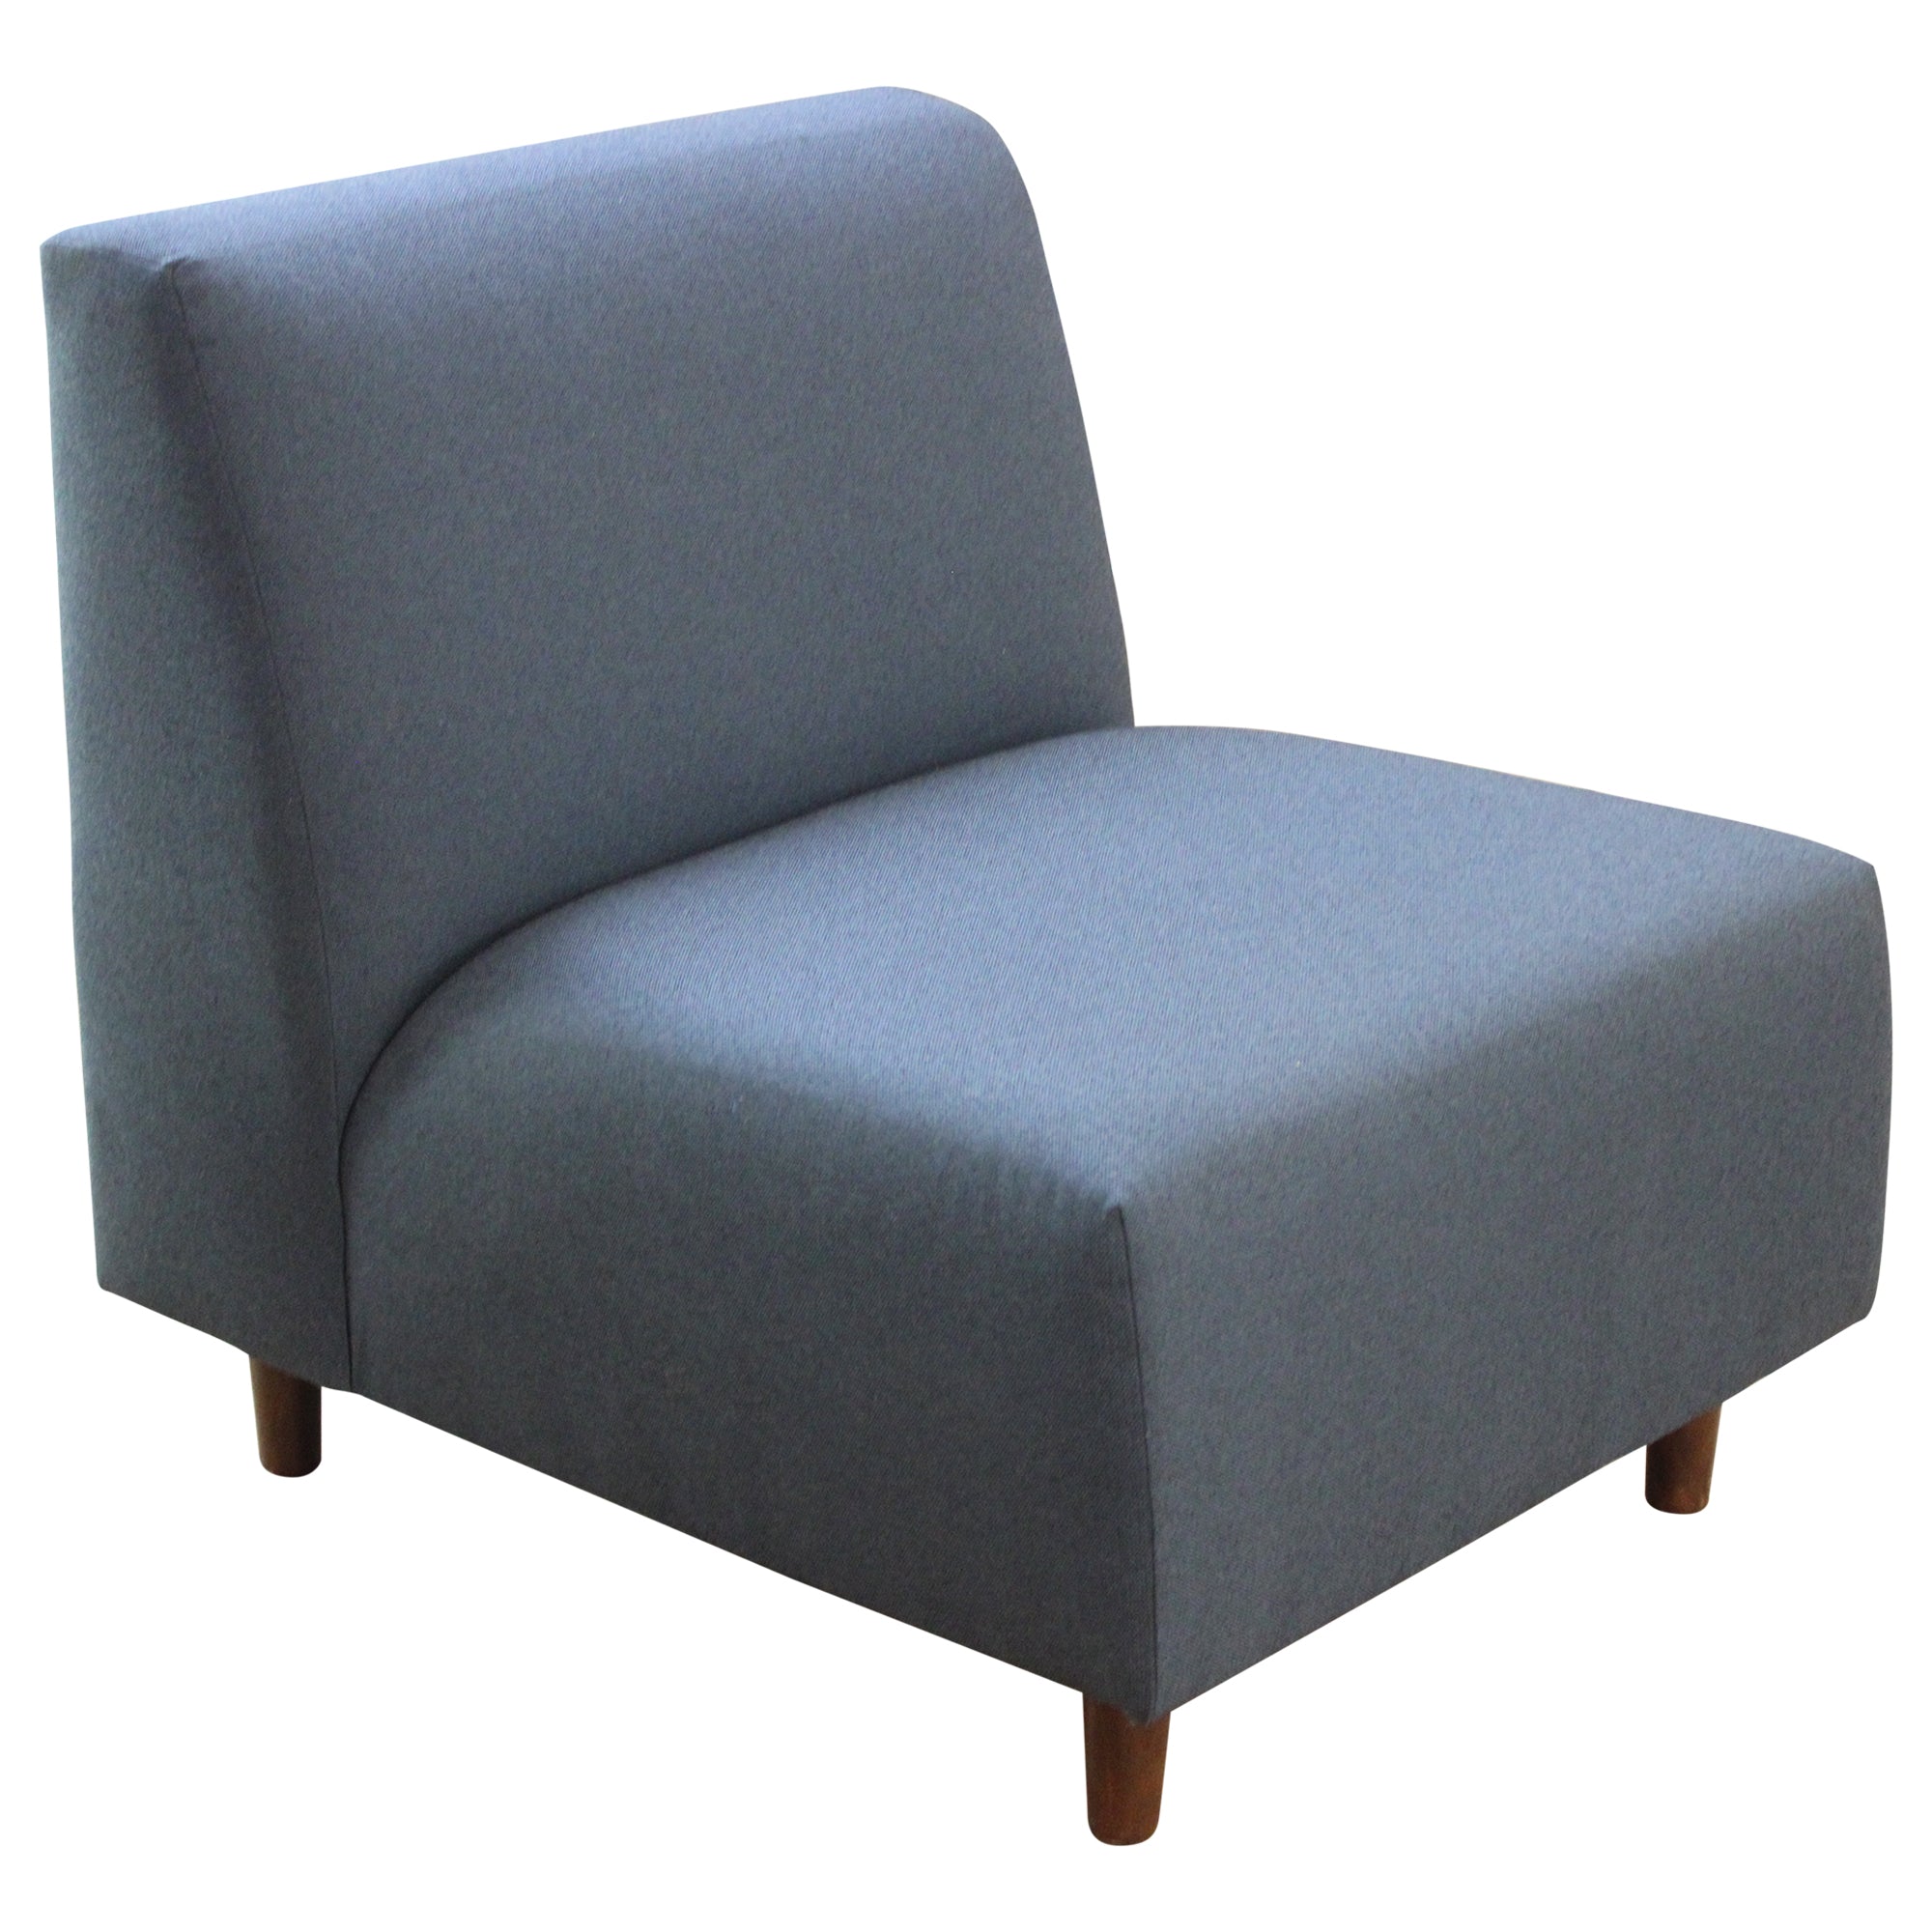 Armless Blue Lounge Chair - Preowned